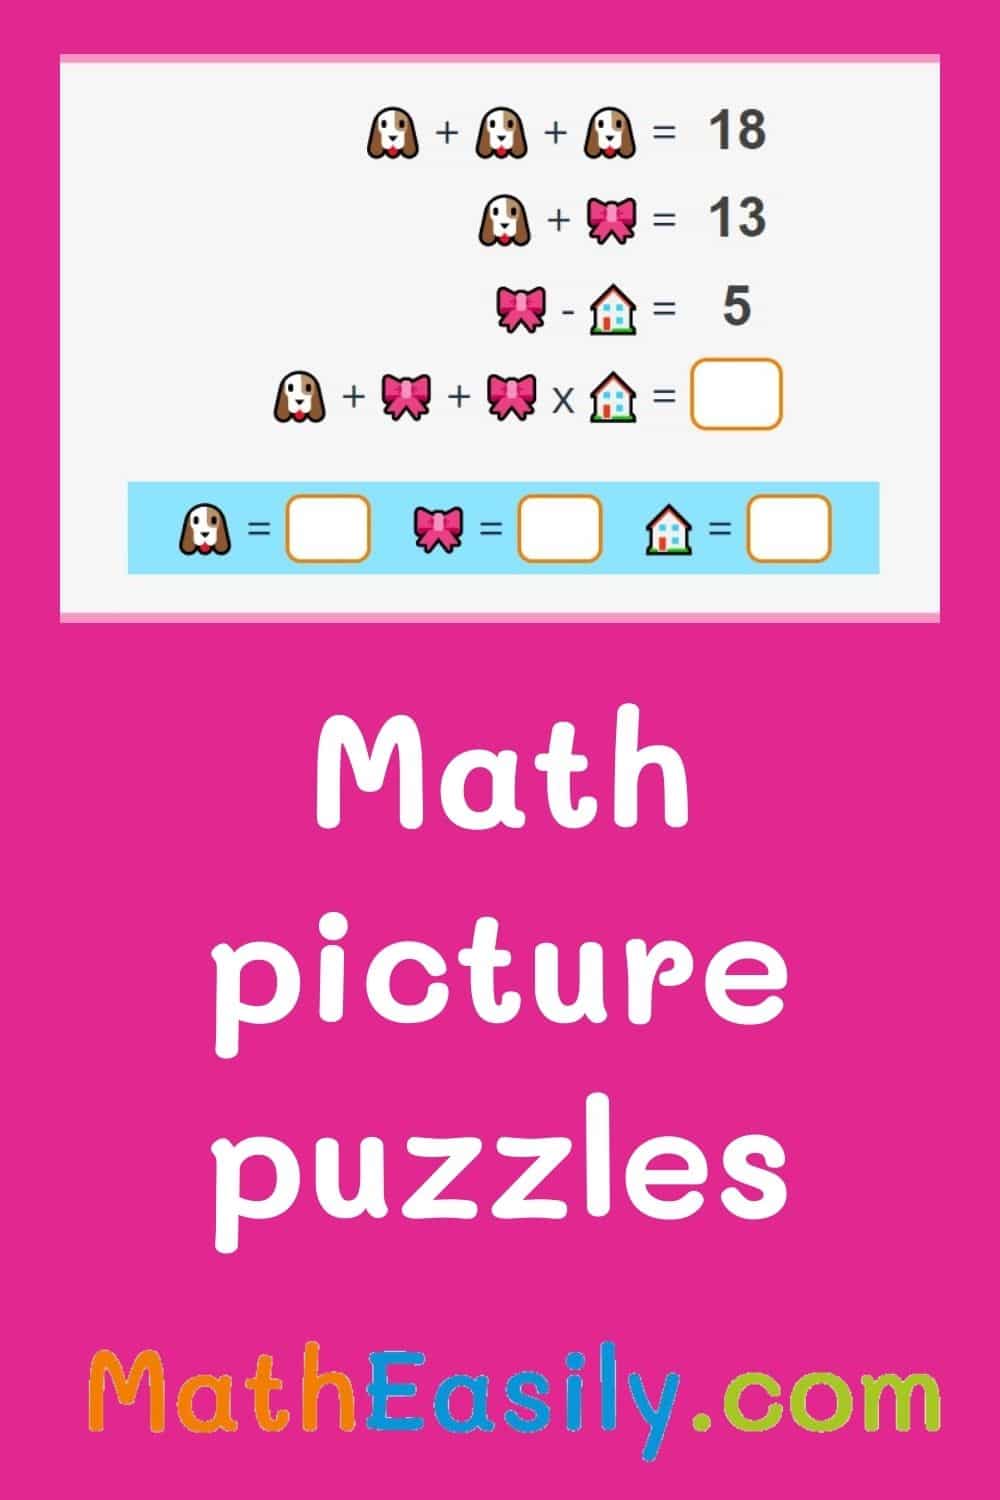 Maths picture puzzles with answers PDF download. picture maths puzzles with answers. algebra picture puzzles. emoji logic puzzles pdf.
Play maths picture puzzles with solutions. puzzles with answers in maths. maths puzzles with pictures and answers. maths picture puzzles for kids.
tricky maths picture puzzles with answers. fun algebra puzzles. math picture equation puzzles with answers.